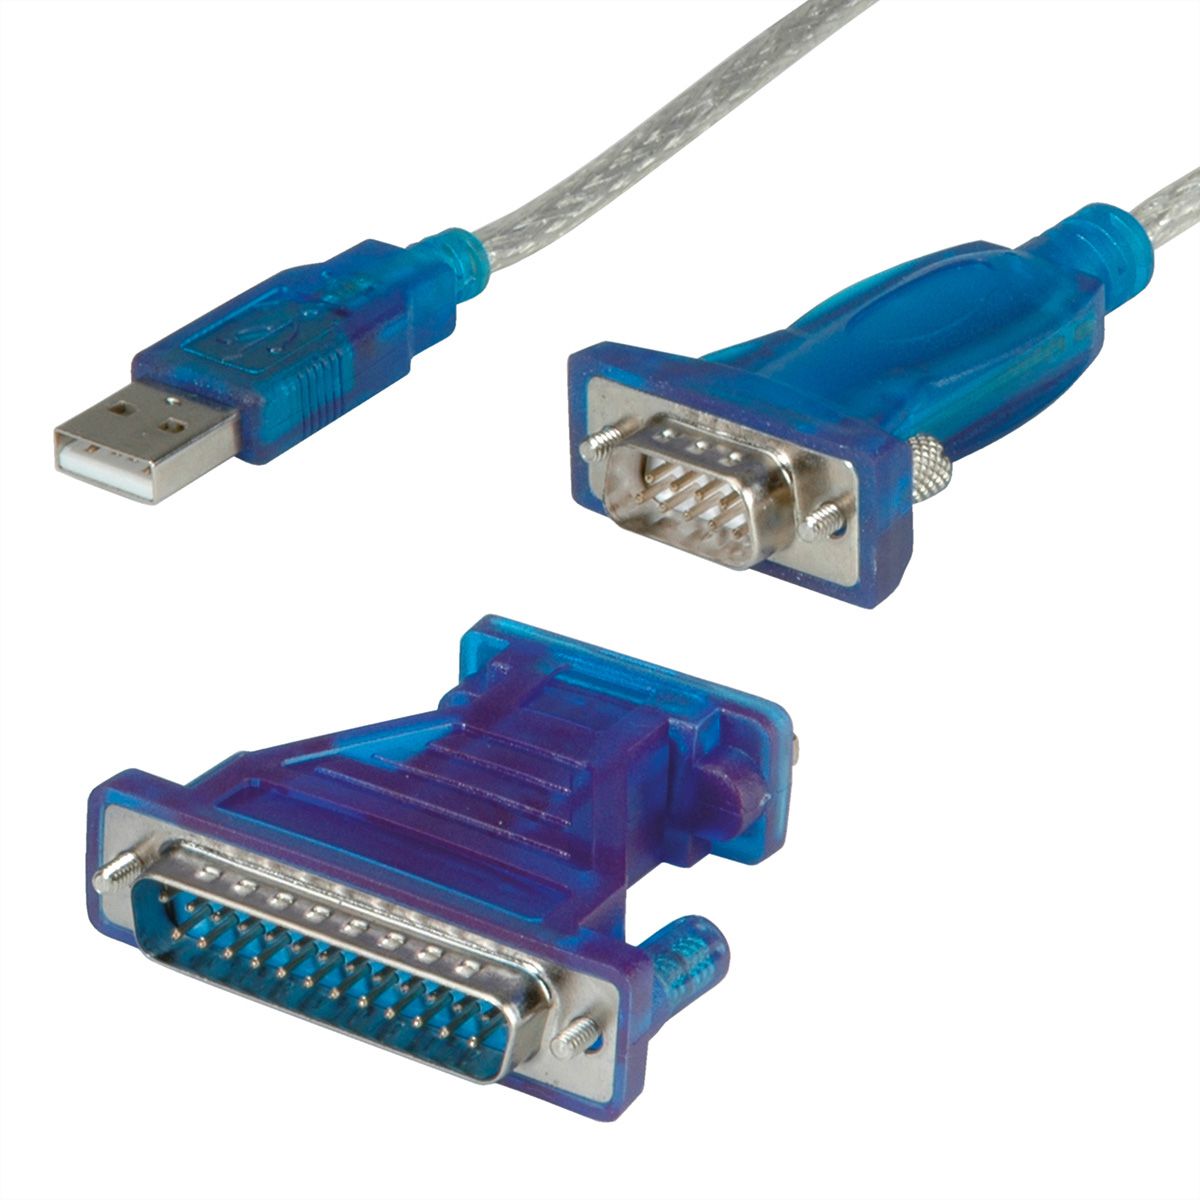 usb to serial adapter u.s.patent nos driver